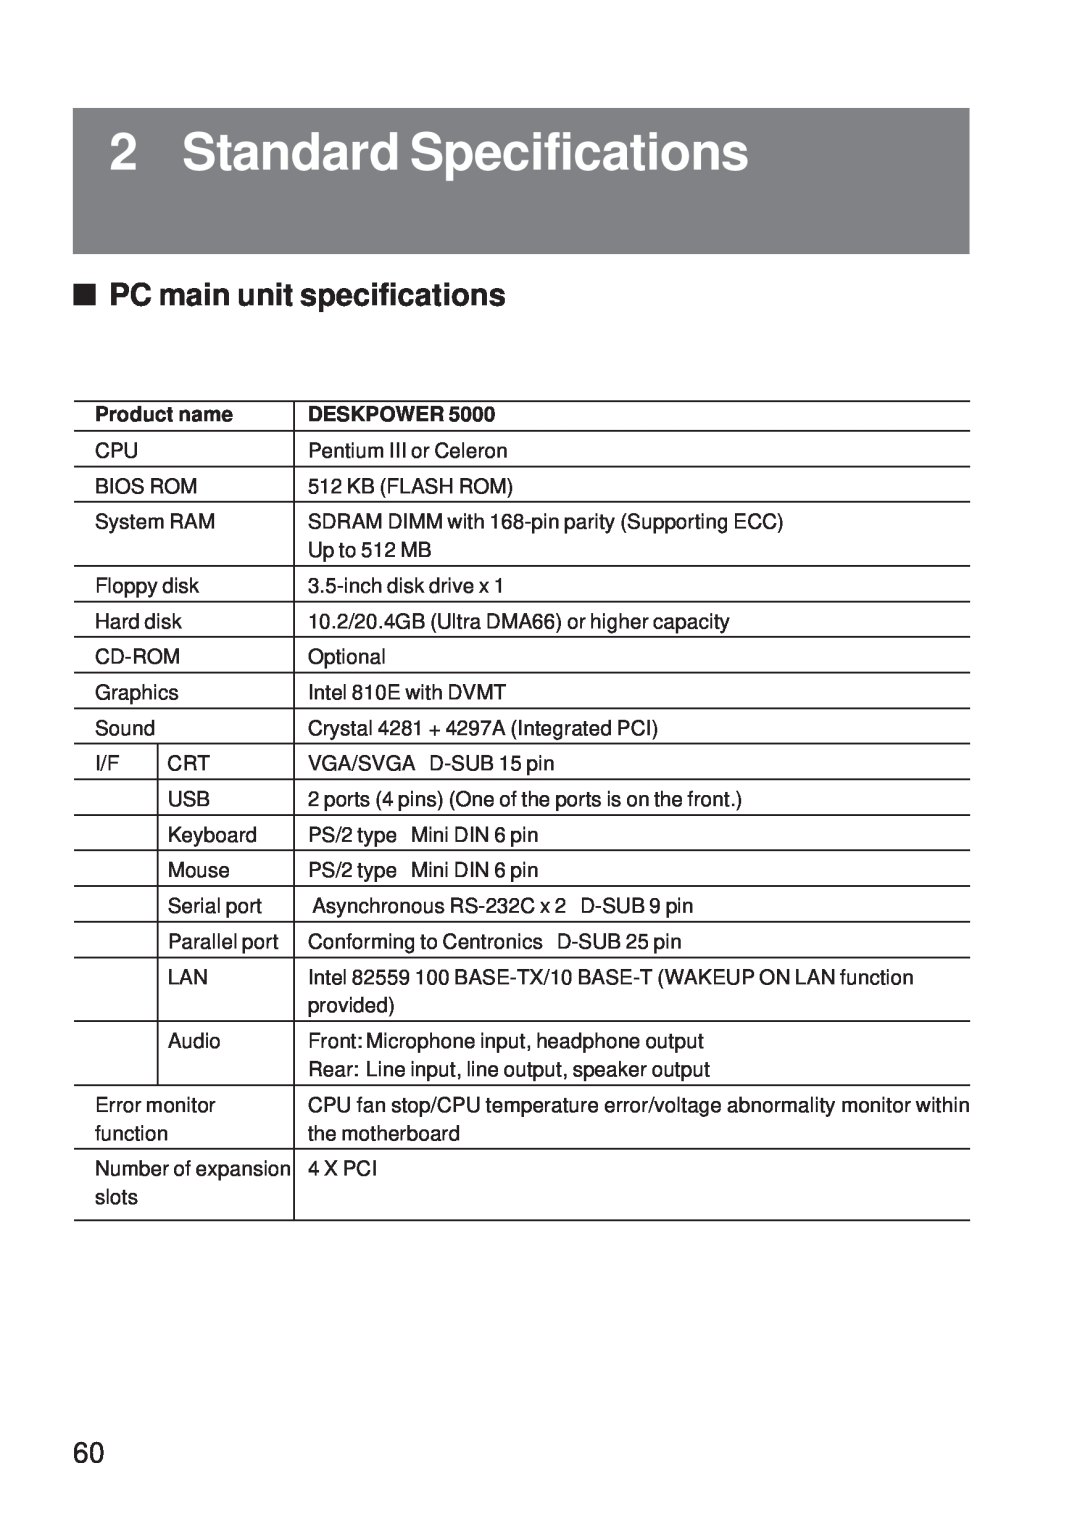 Fujitsu 5000 user manual Standard Specifications, PC main unit specifications, Product name, Deskpower 